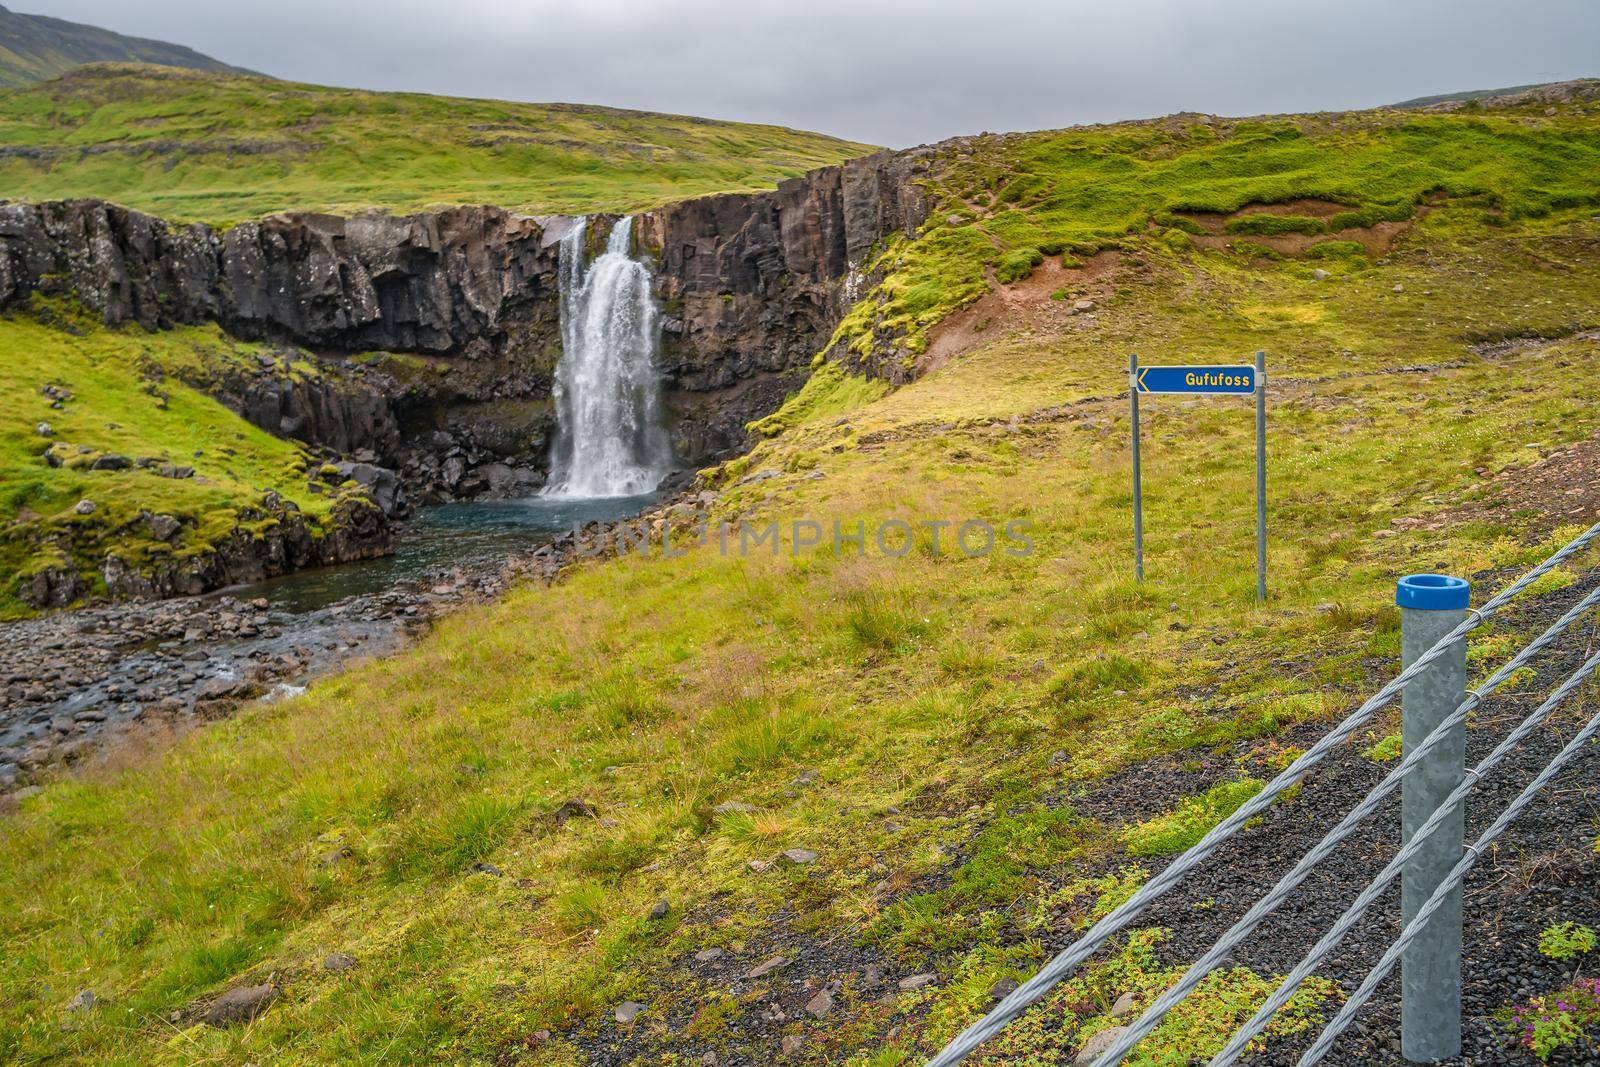 Lonely waterfall called Gufufoss near the road with a sign spelt its name at East Iceland